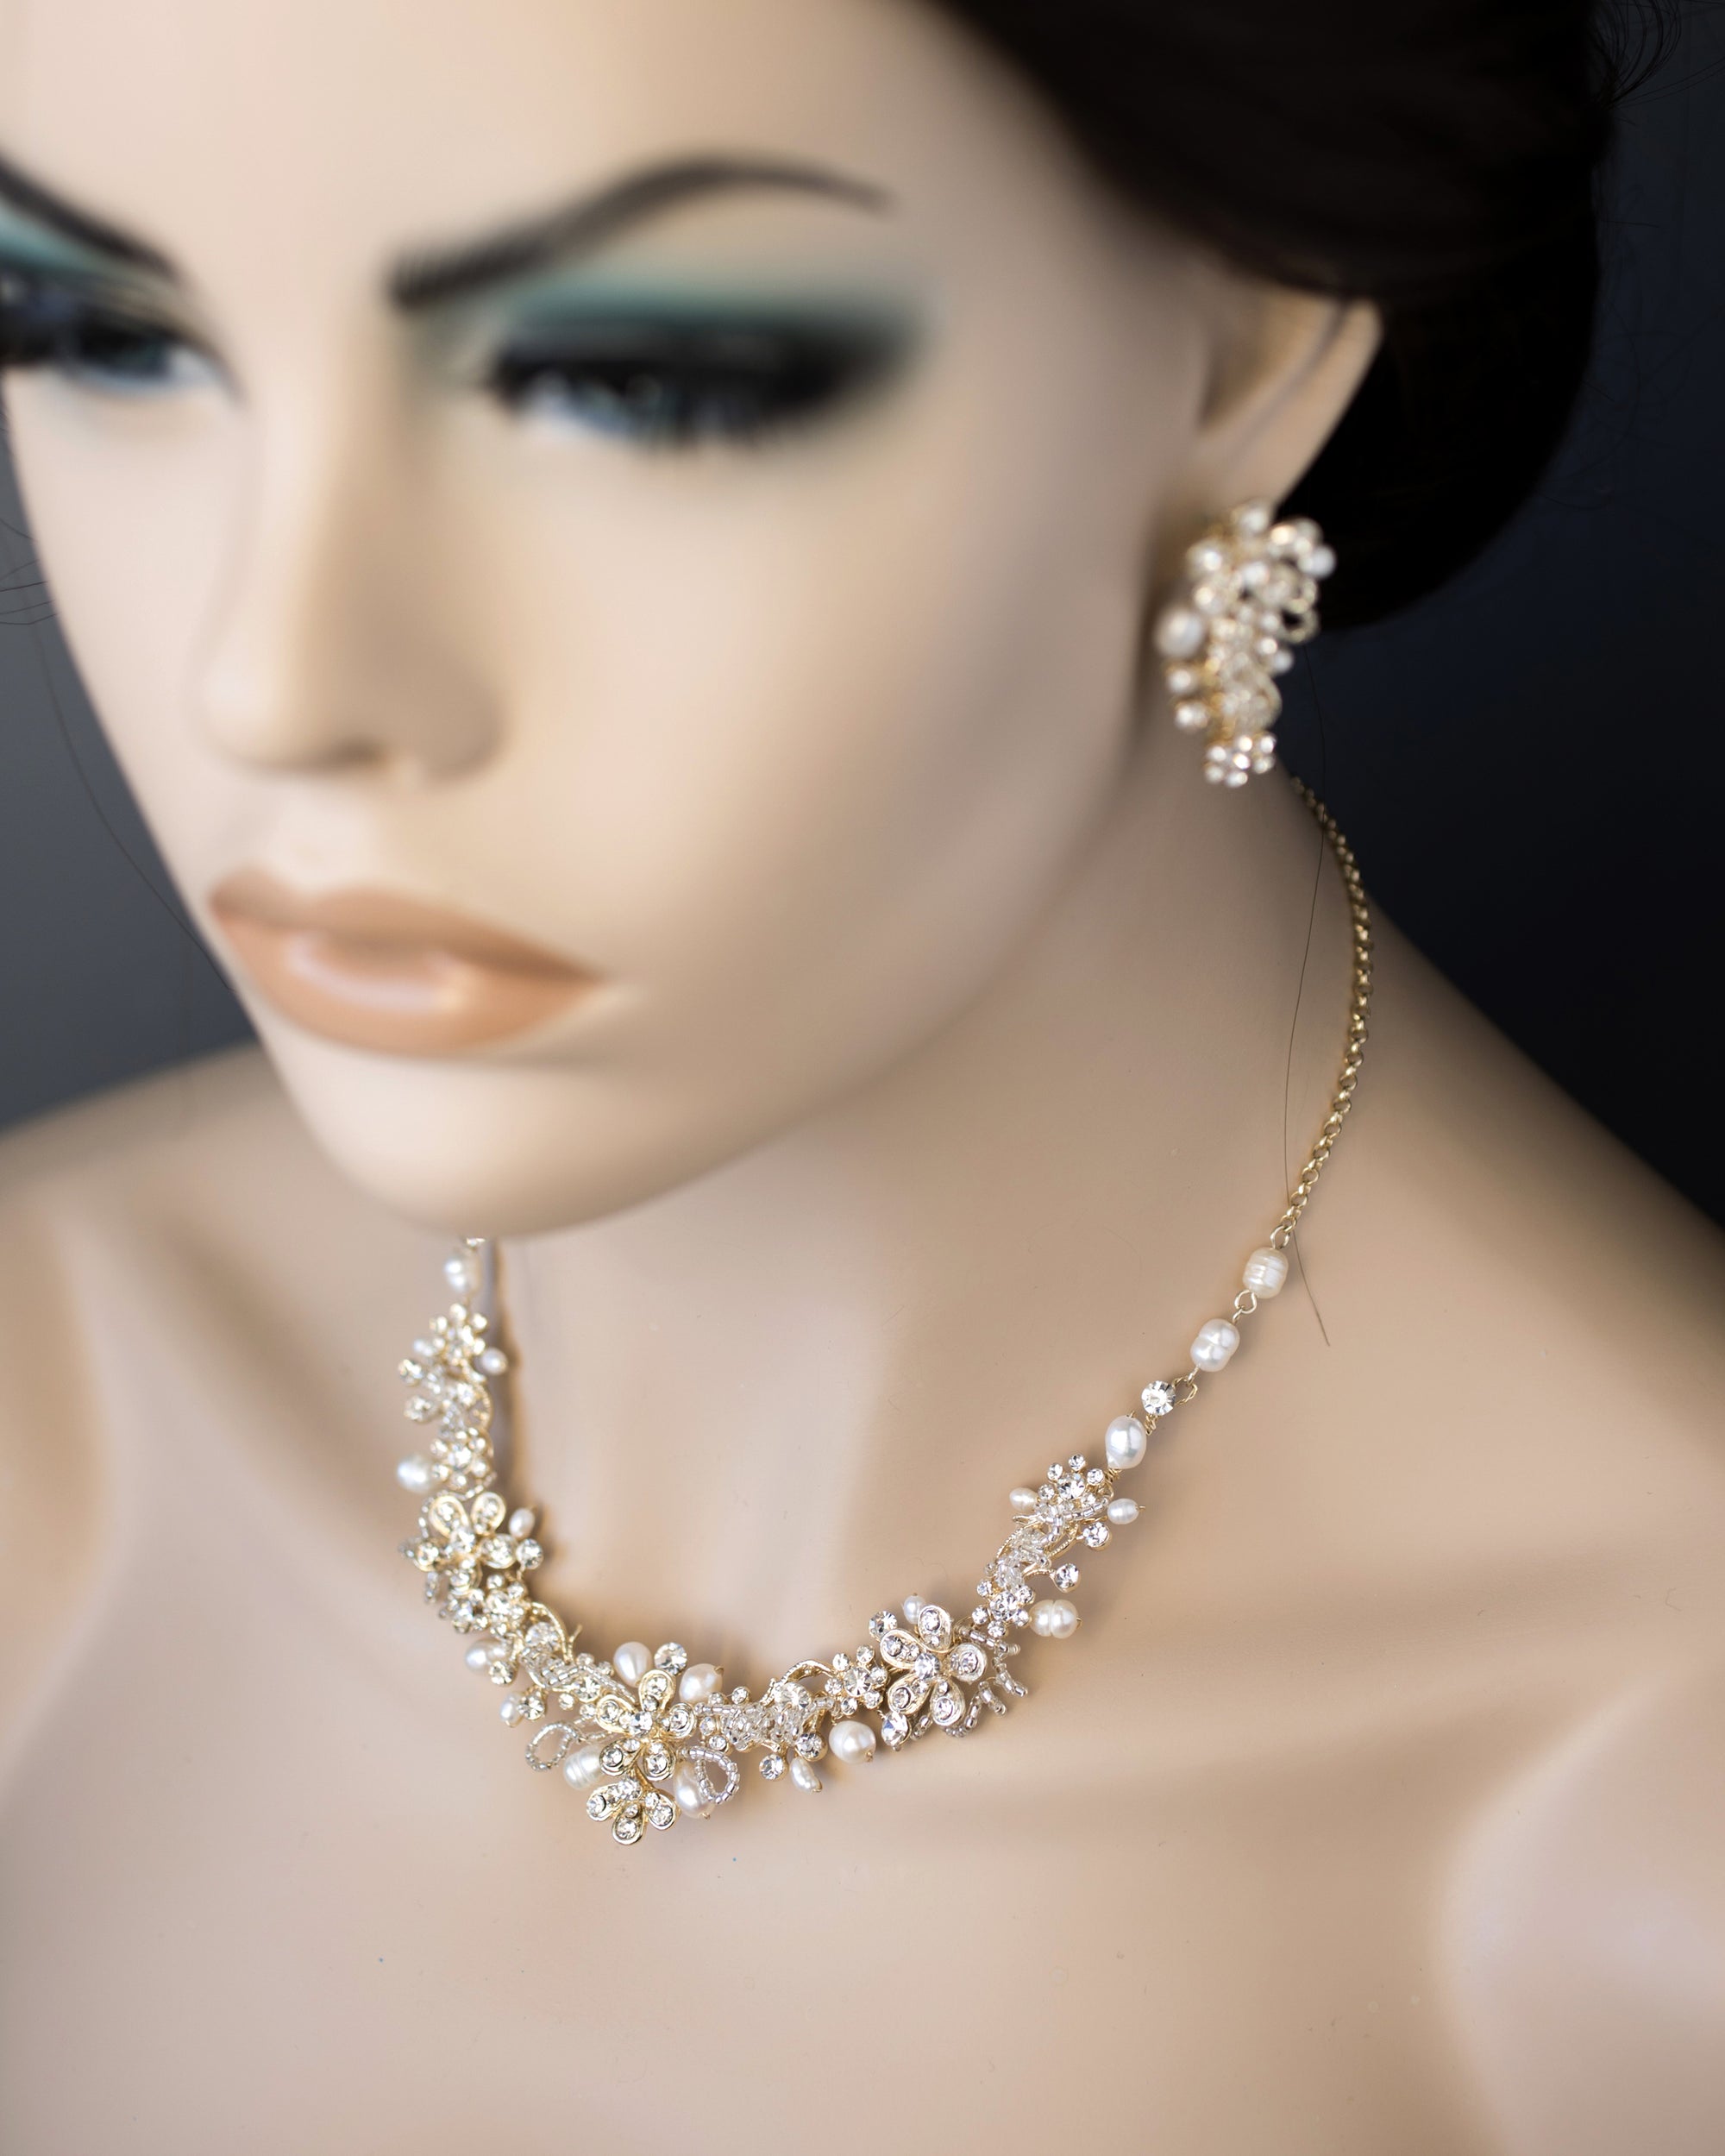 Bridal Necklace Set with Pearls in Gold